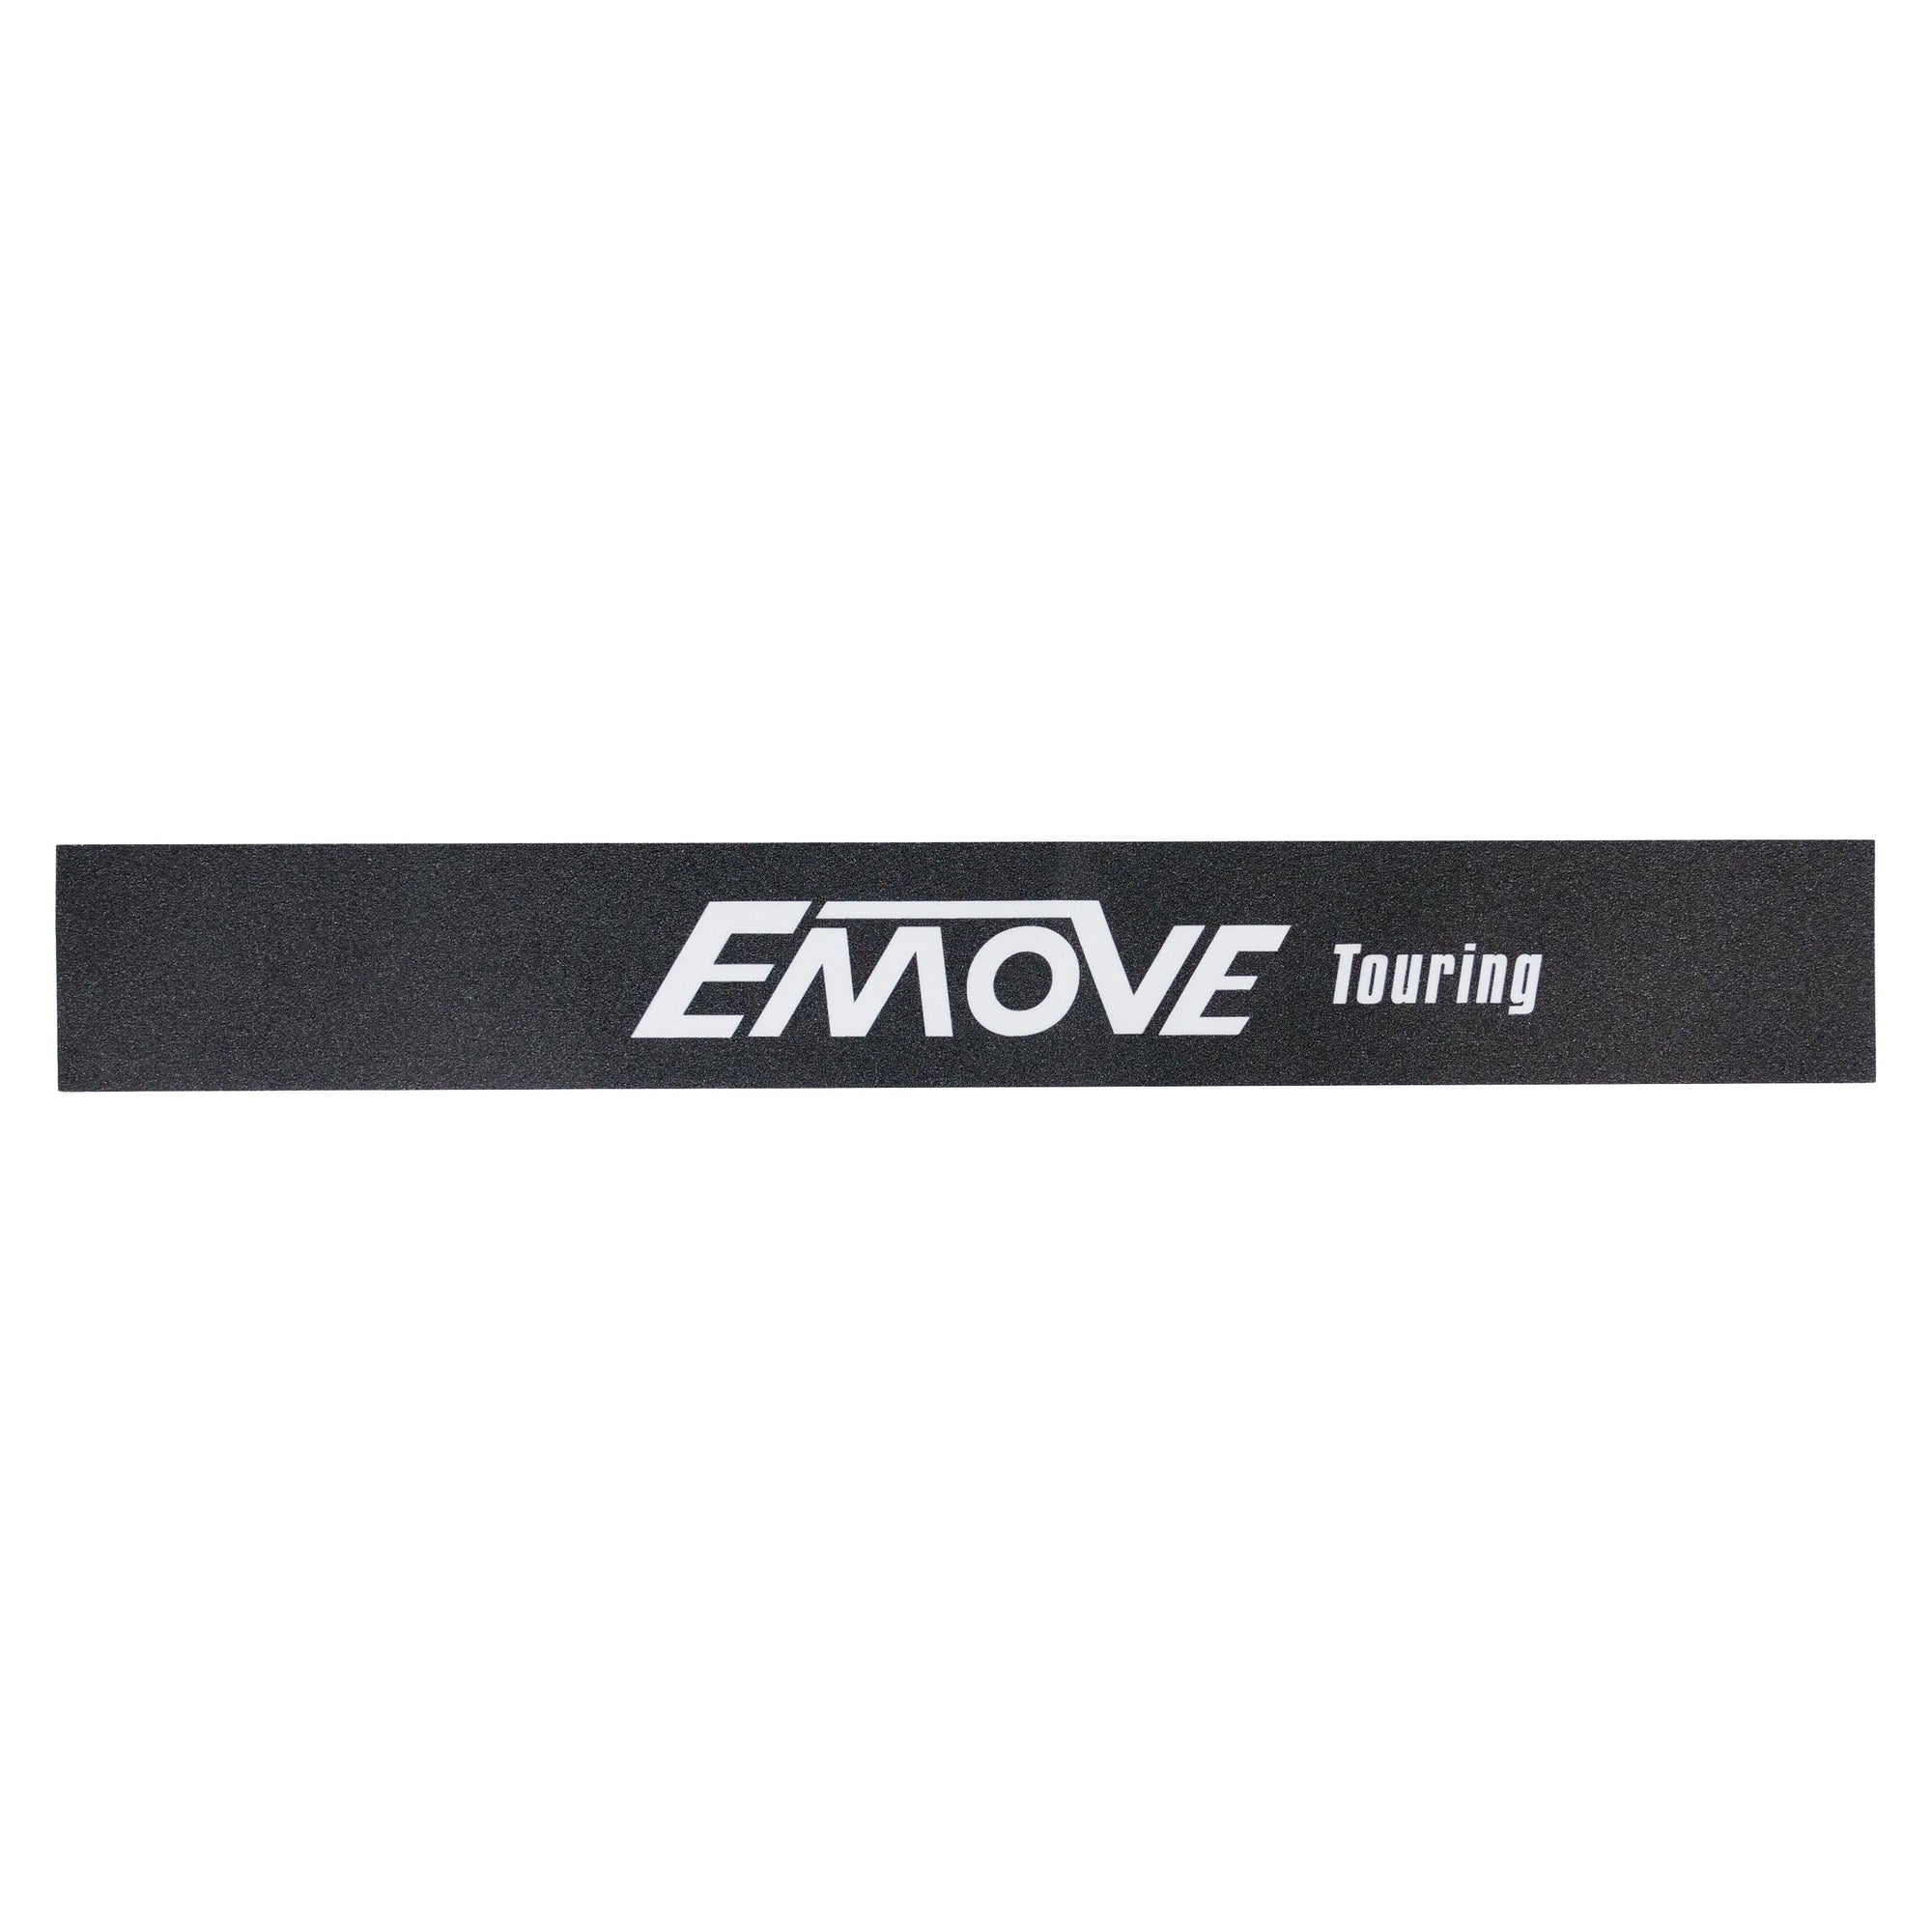 Grip tape for EMOVE Touring